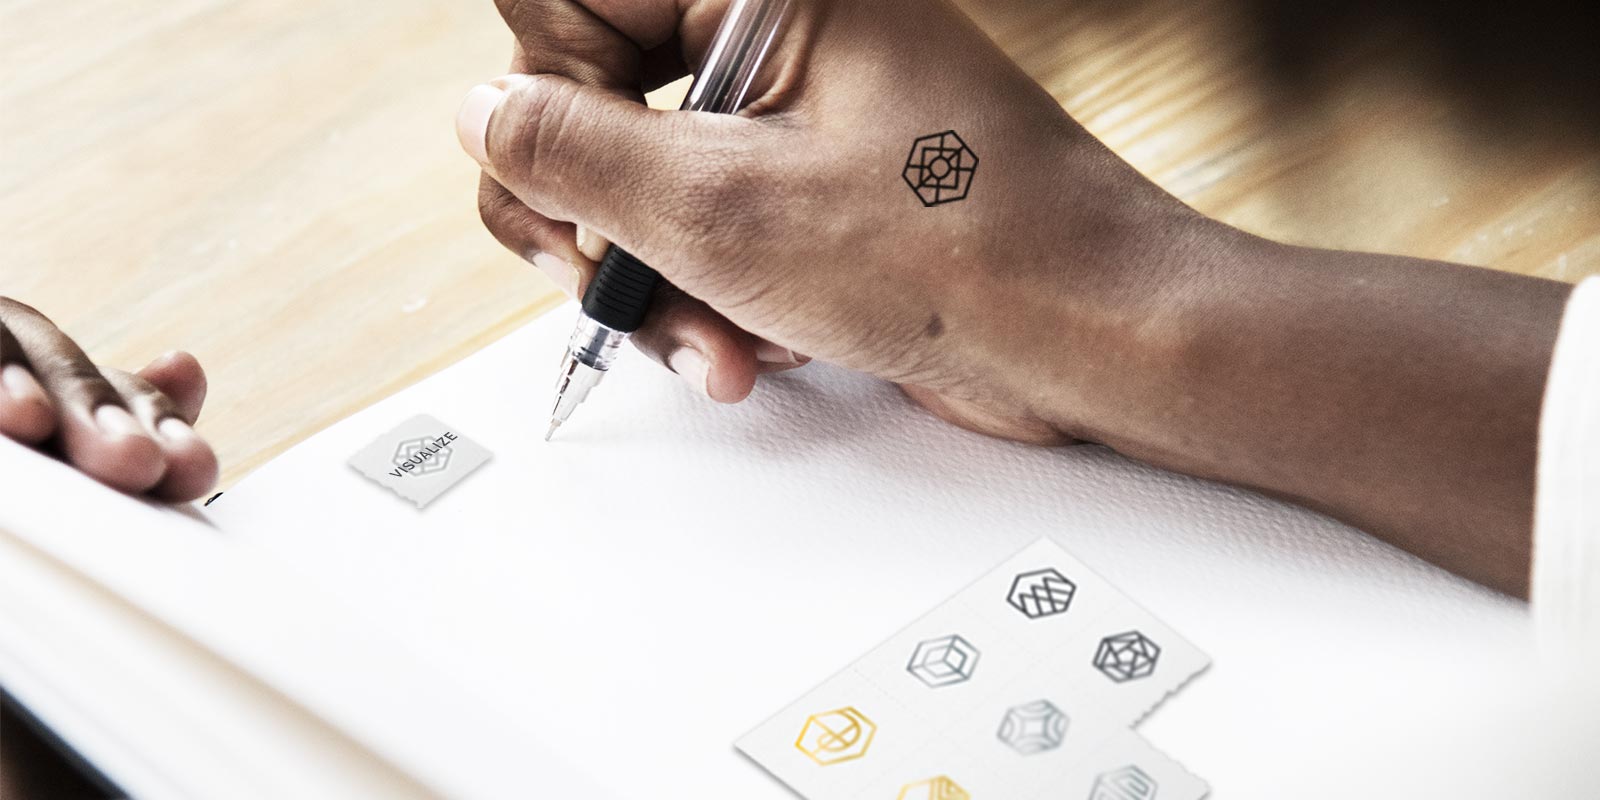 Young professional woman combining the mindfulness exercises of journaling with our temporary tattoo symbolizing “visualize"